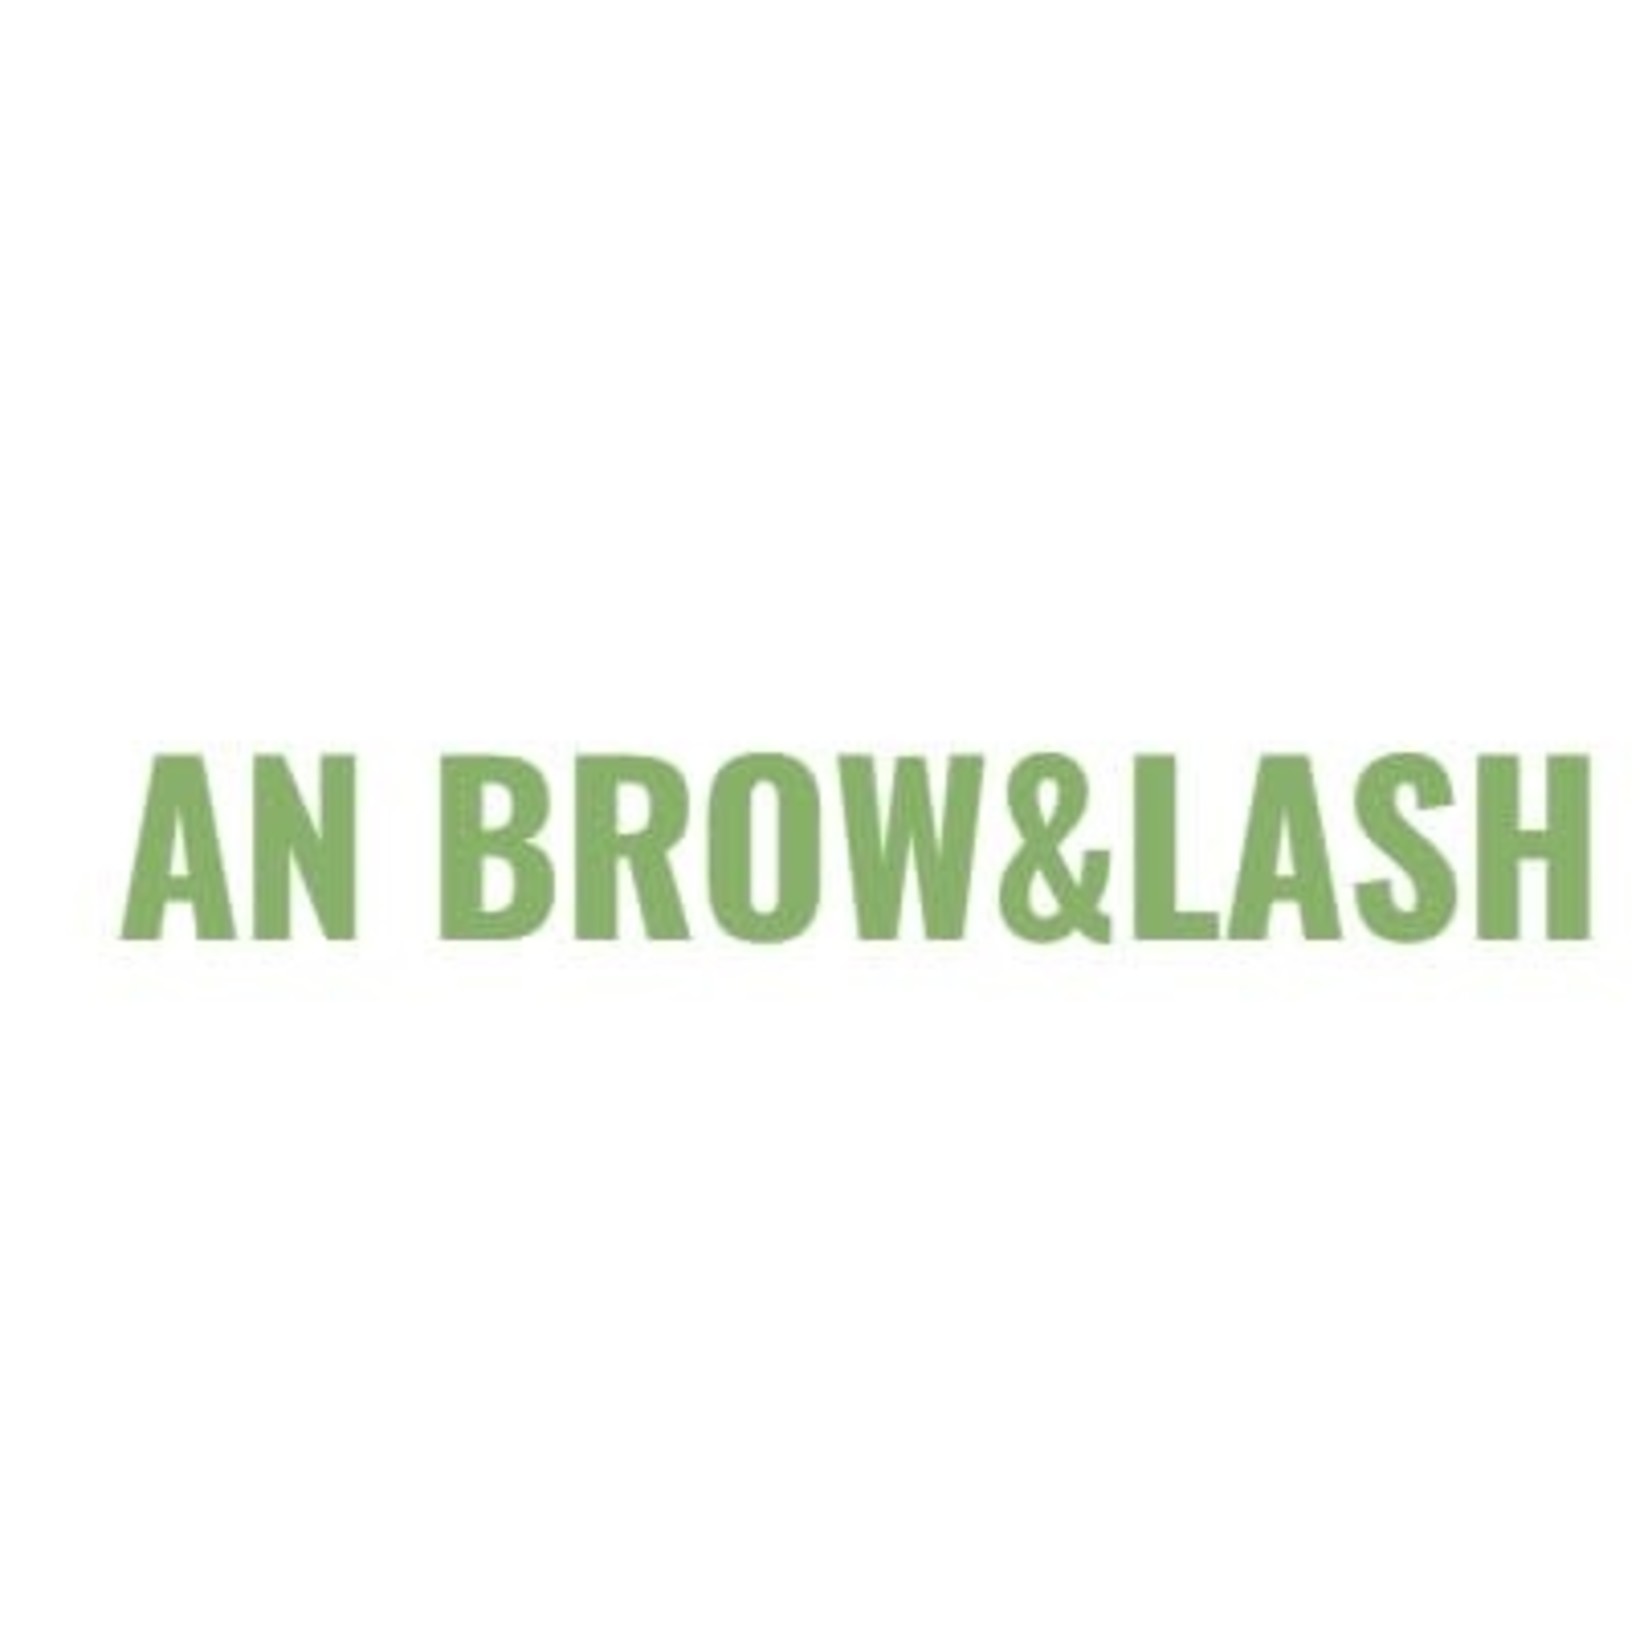 AN Brow & Lash-St. Charles $12 certificate - AN Brow & Lash-St. Charles -  Eyebrow and Tinting